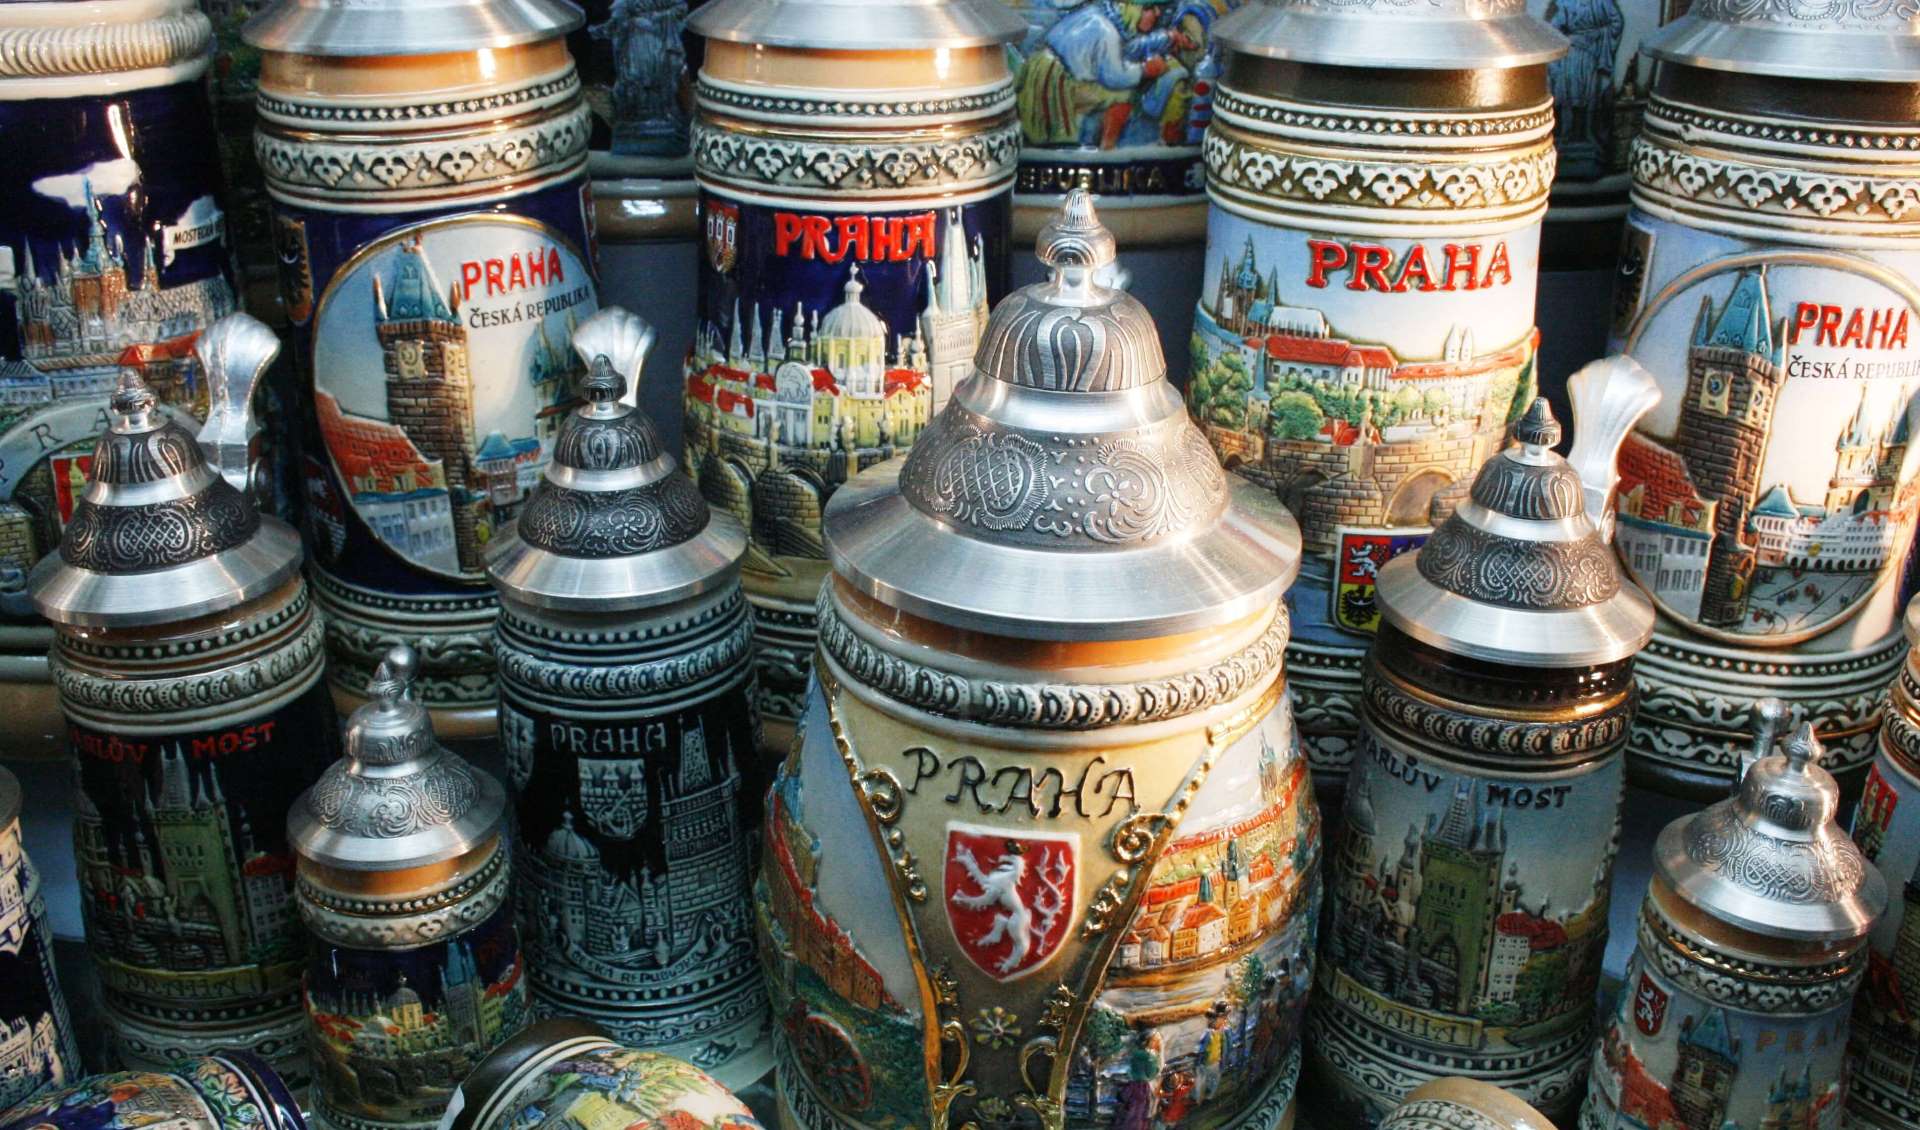 What to Buy in Prague: 19 Ideas of Souvenirs and Gifts